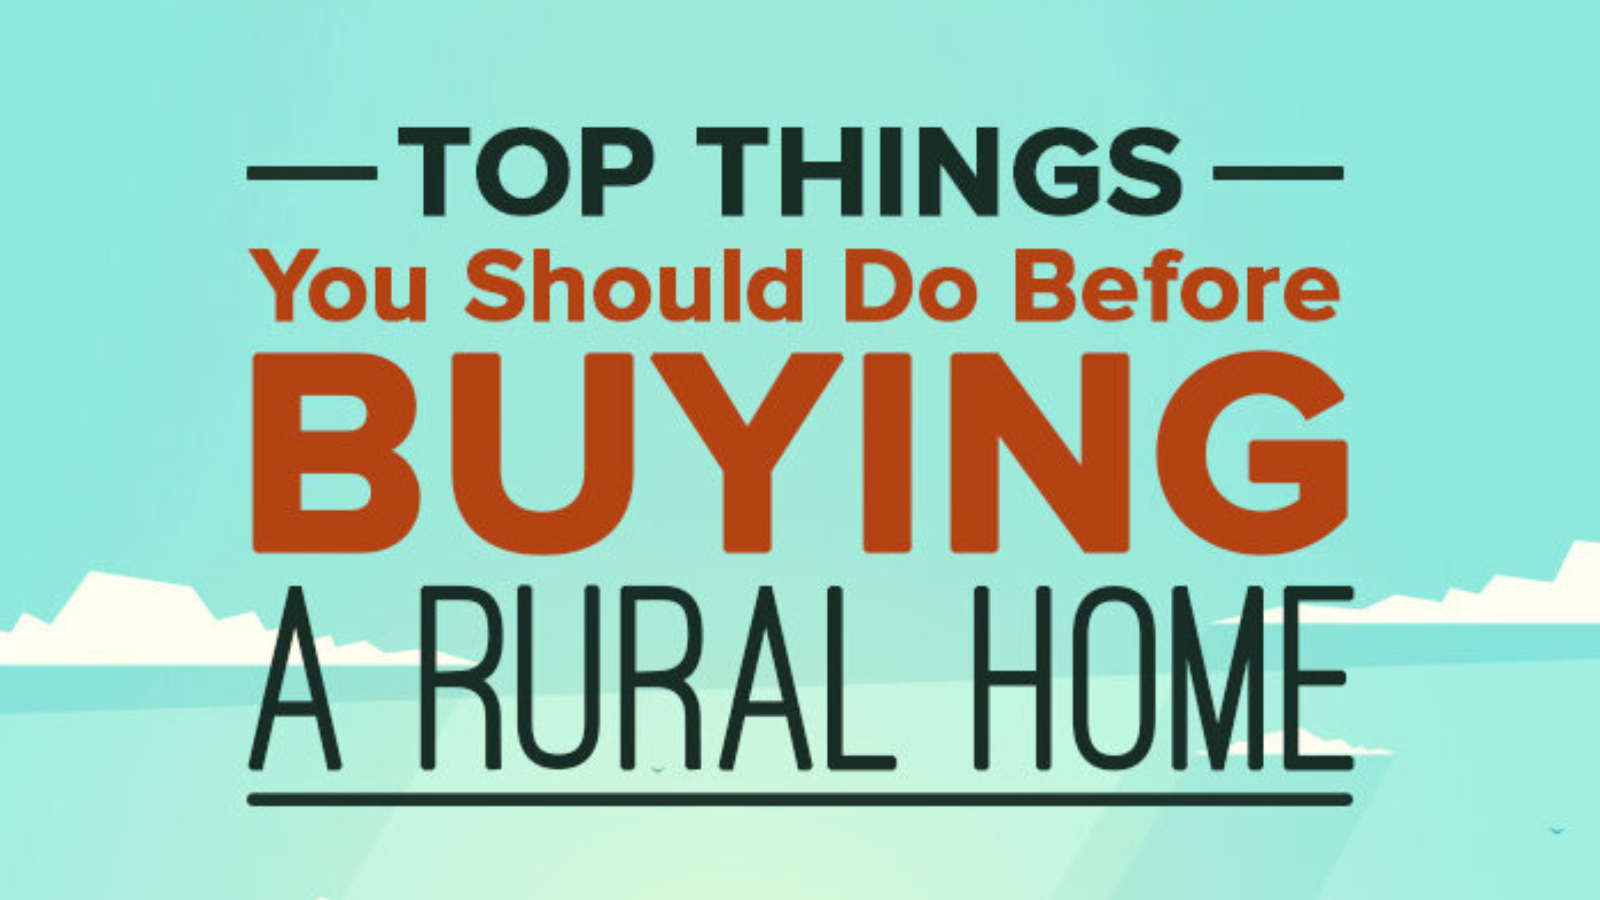 Top Things You Should Do Before Buying A Rural Home